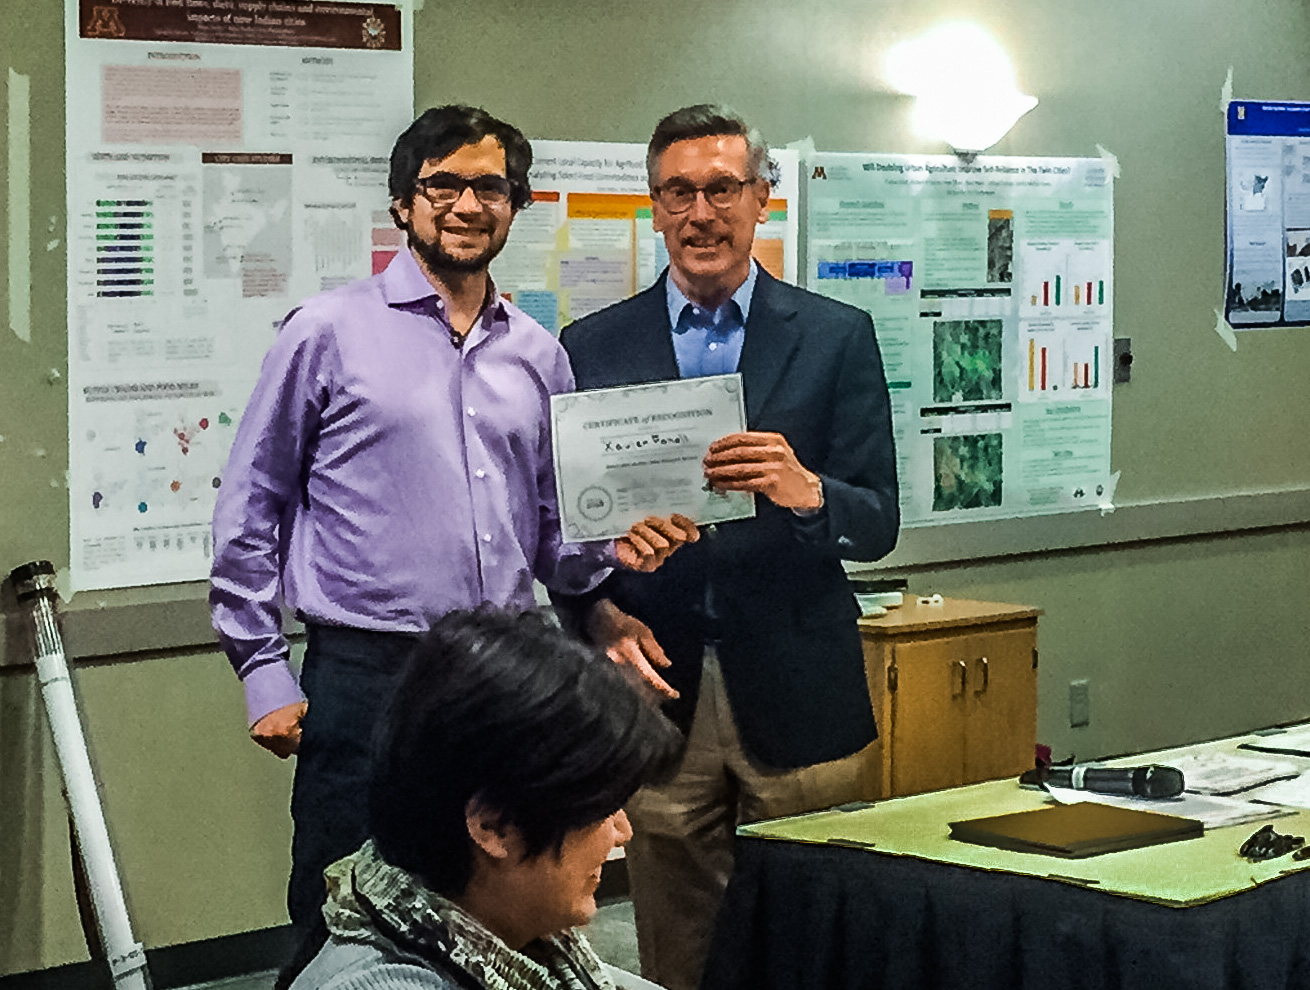 Xavi Fonoll of the University of Michigan accepts the award for top poster in physical modeling group from Bob Johns, a senior fellow at the Humphrey School of Public Affairs and strategy adviser to the network.